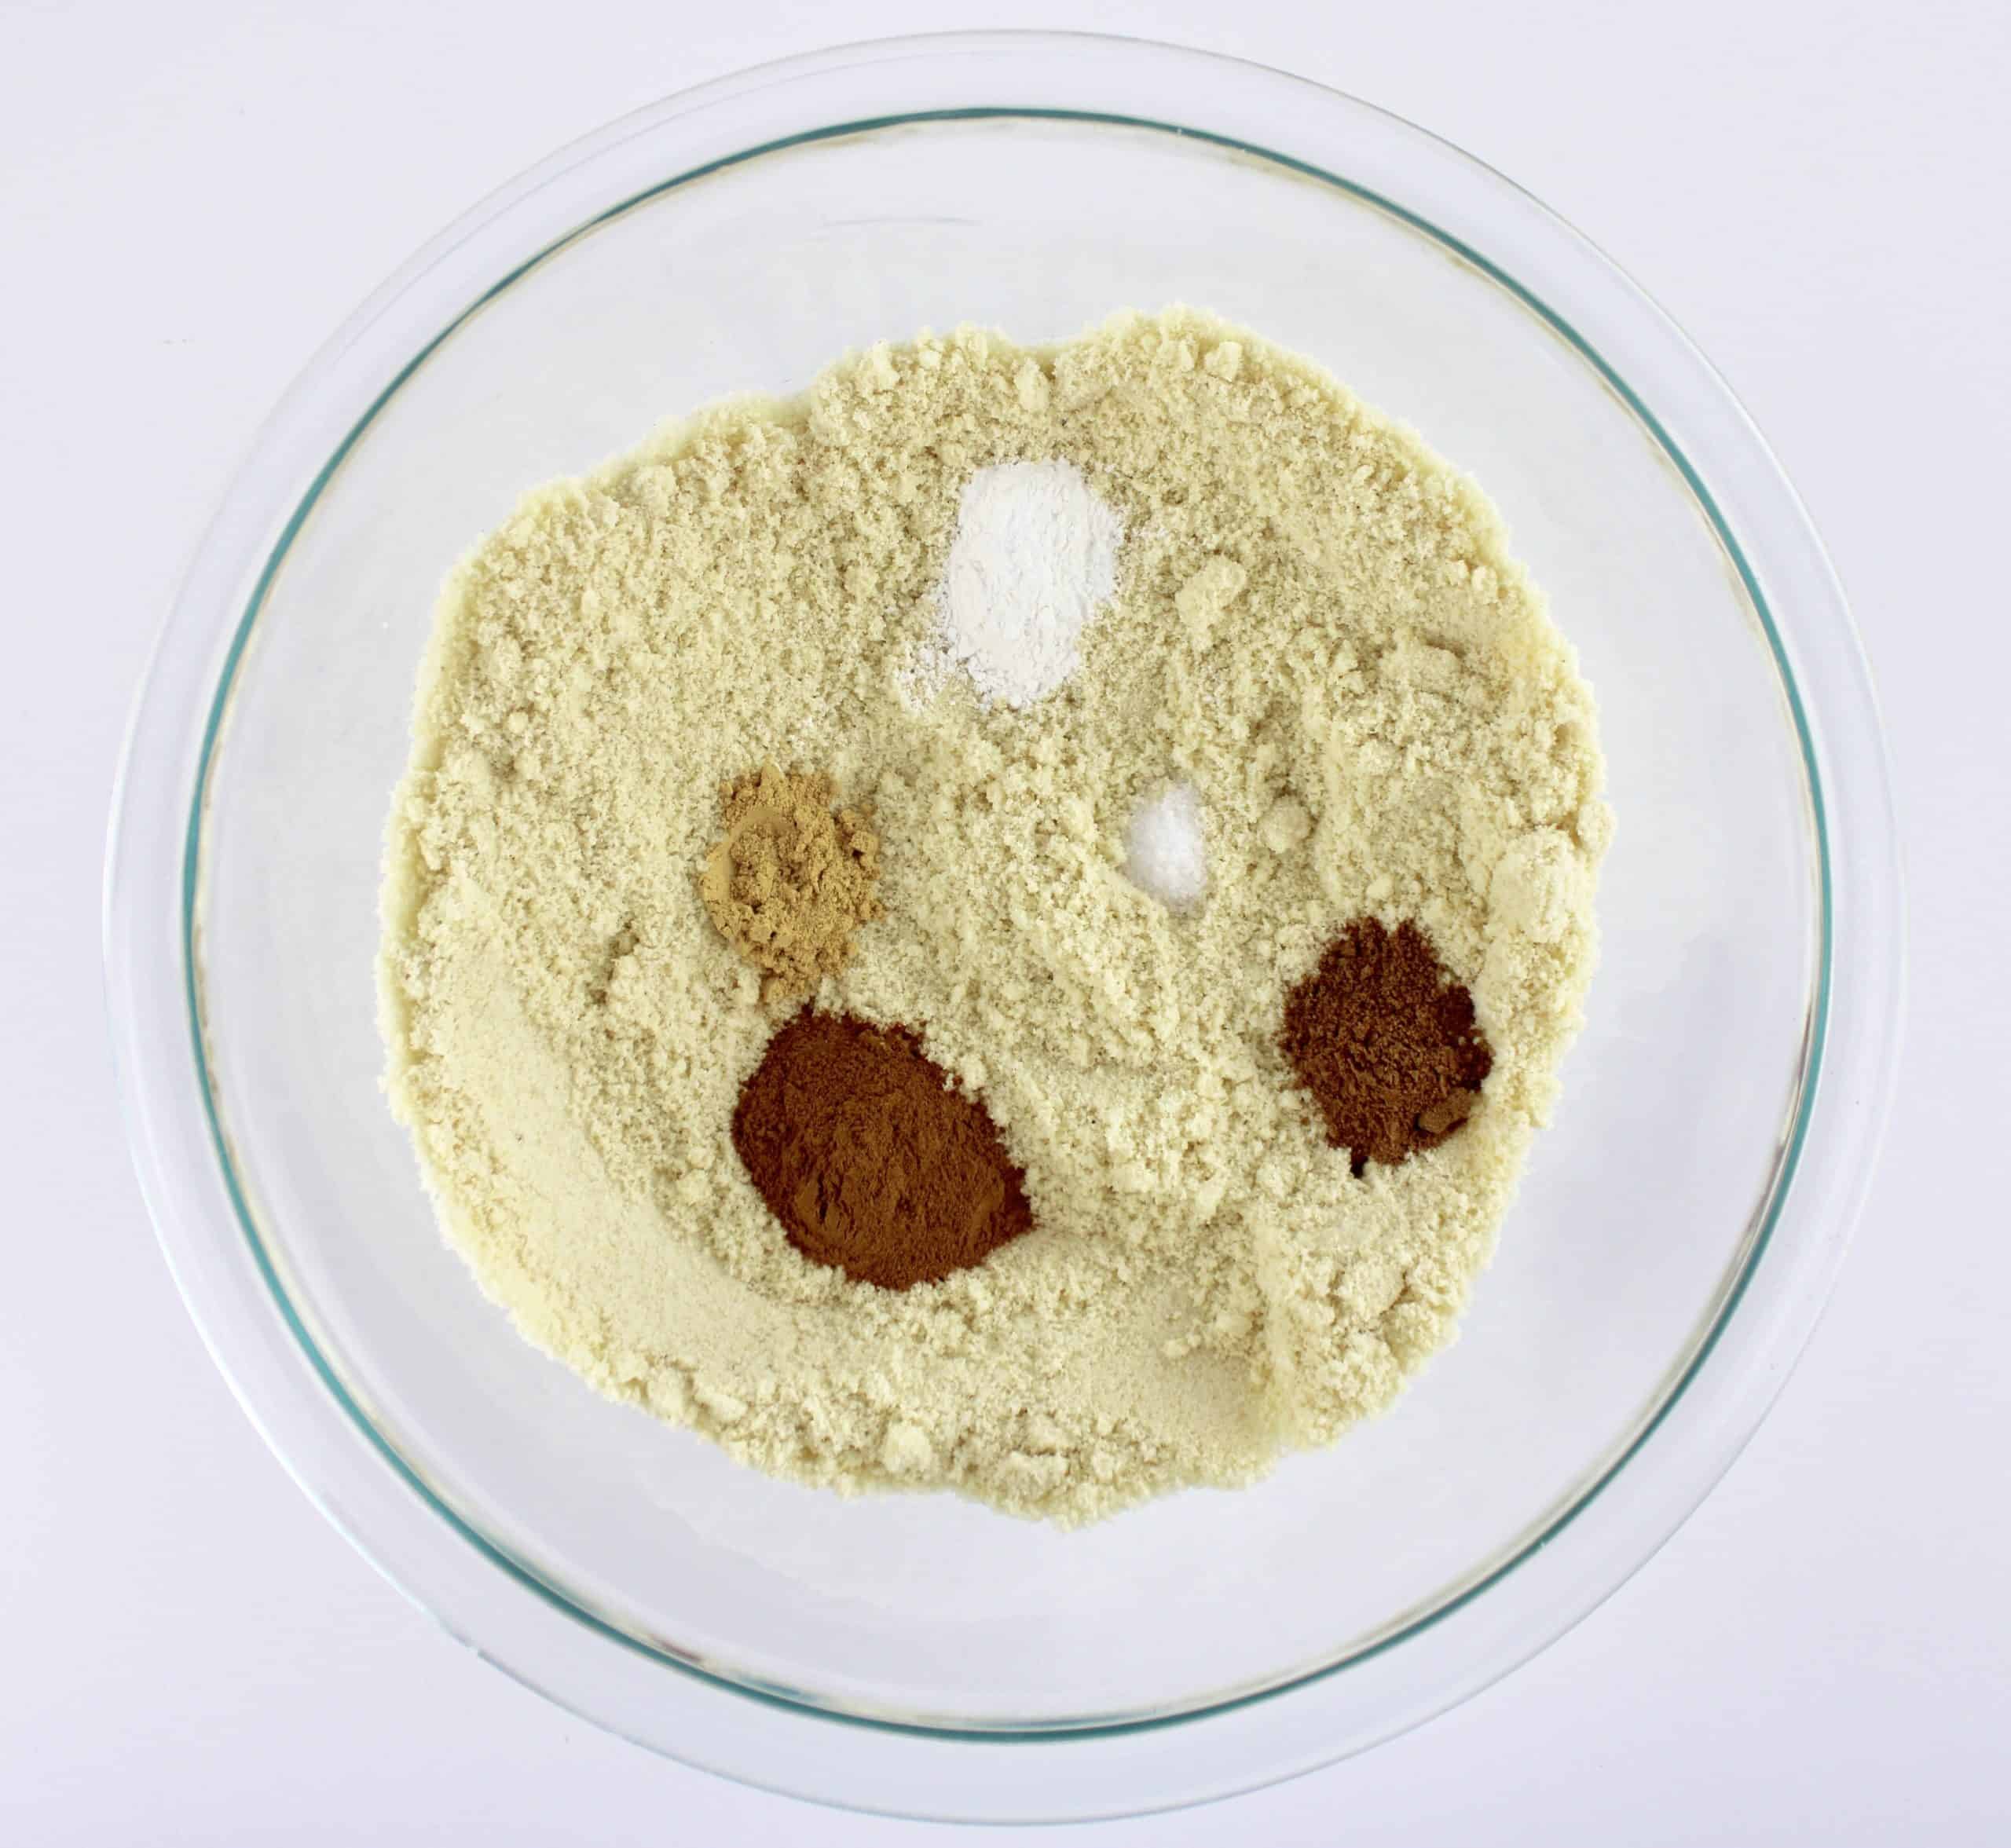 almond flour and spices in glass bowl unmixed